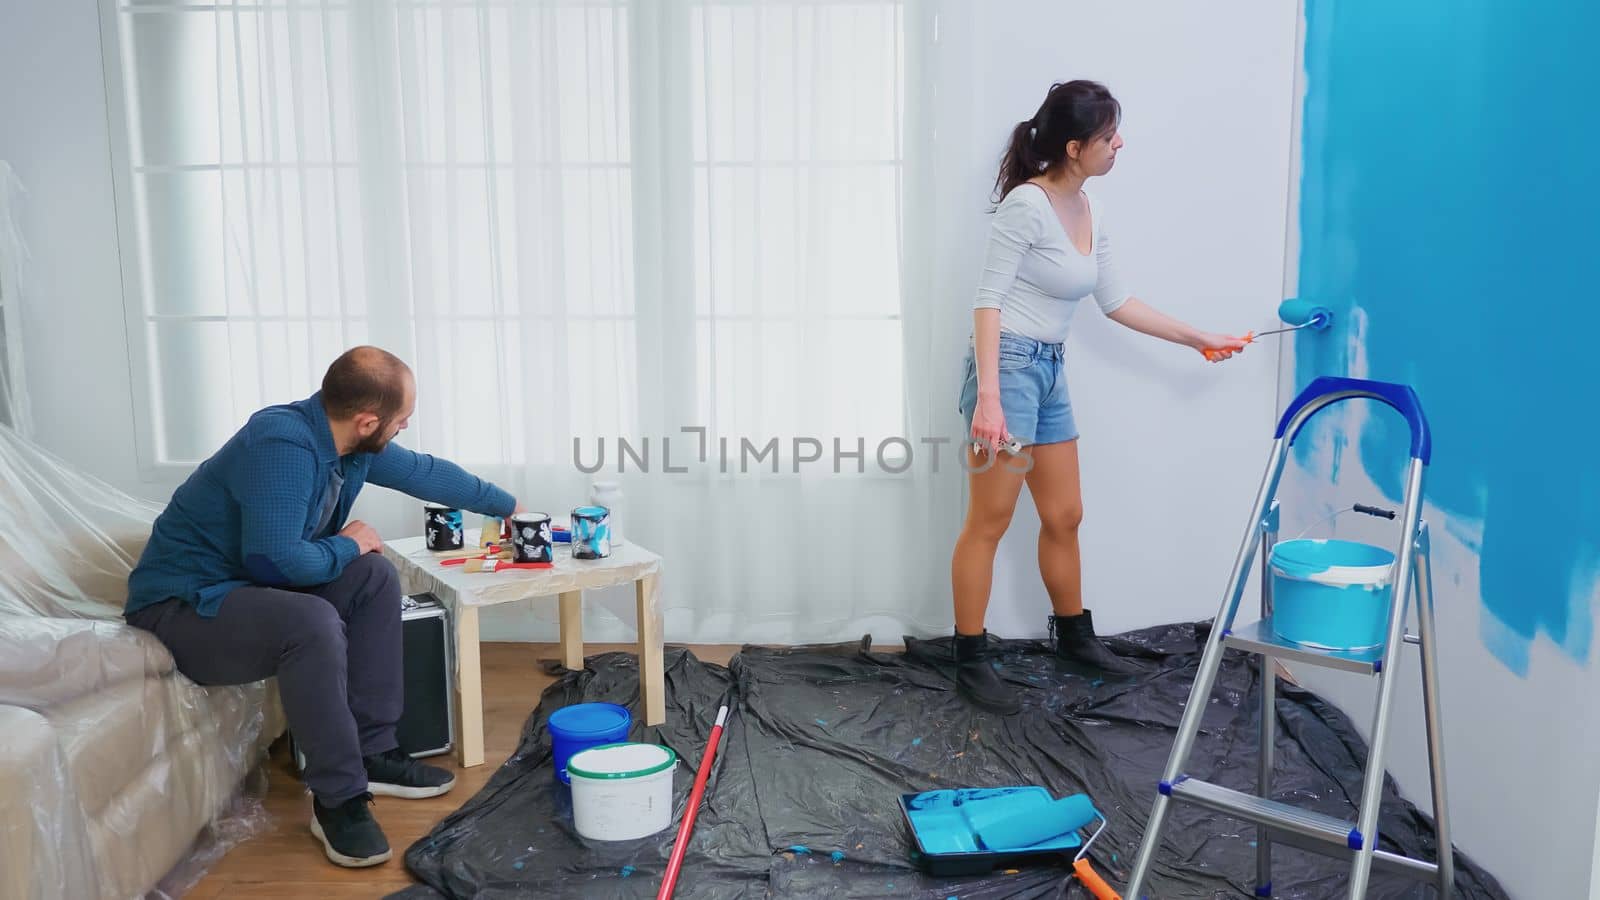 Wife painting wall with roller brush by DCStudio